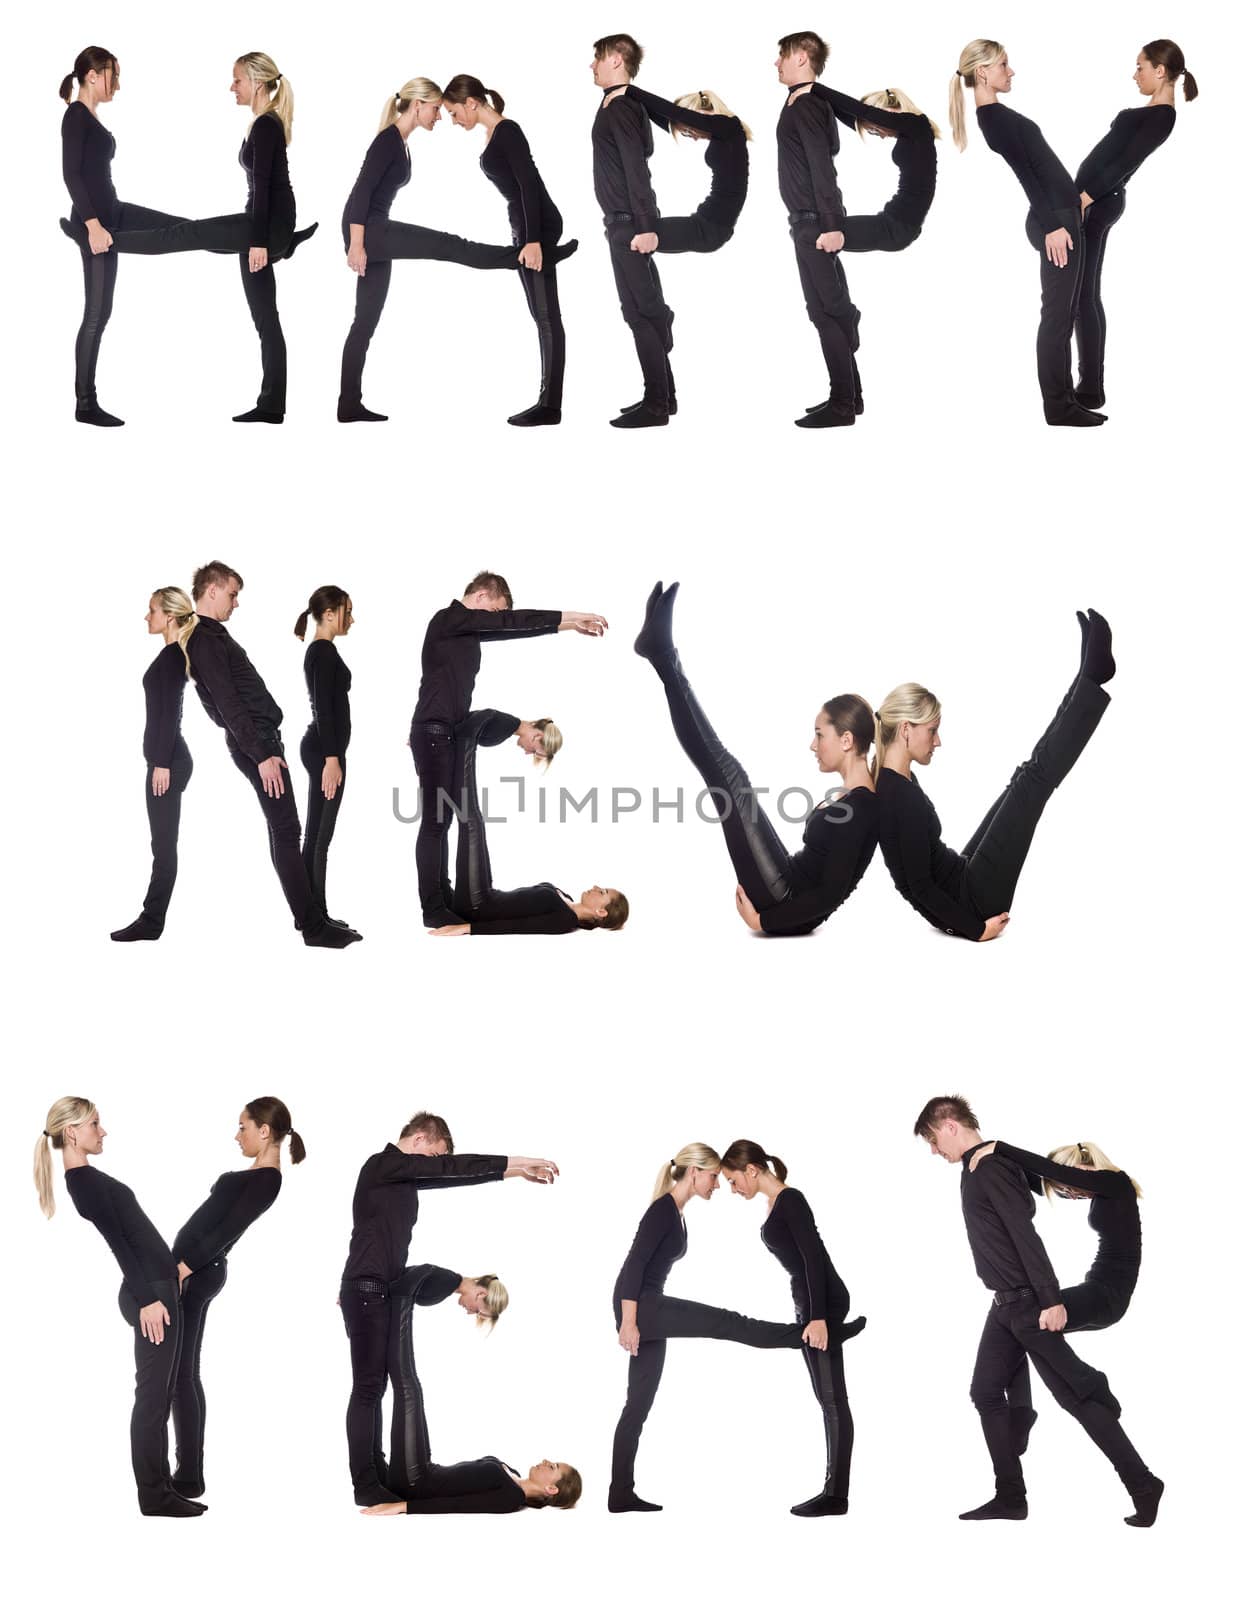 Group of people forming the phrase 'Happy new year' by gemenacom